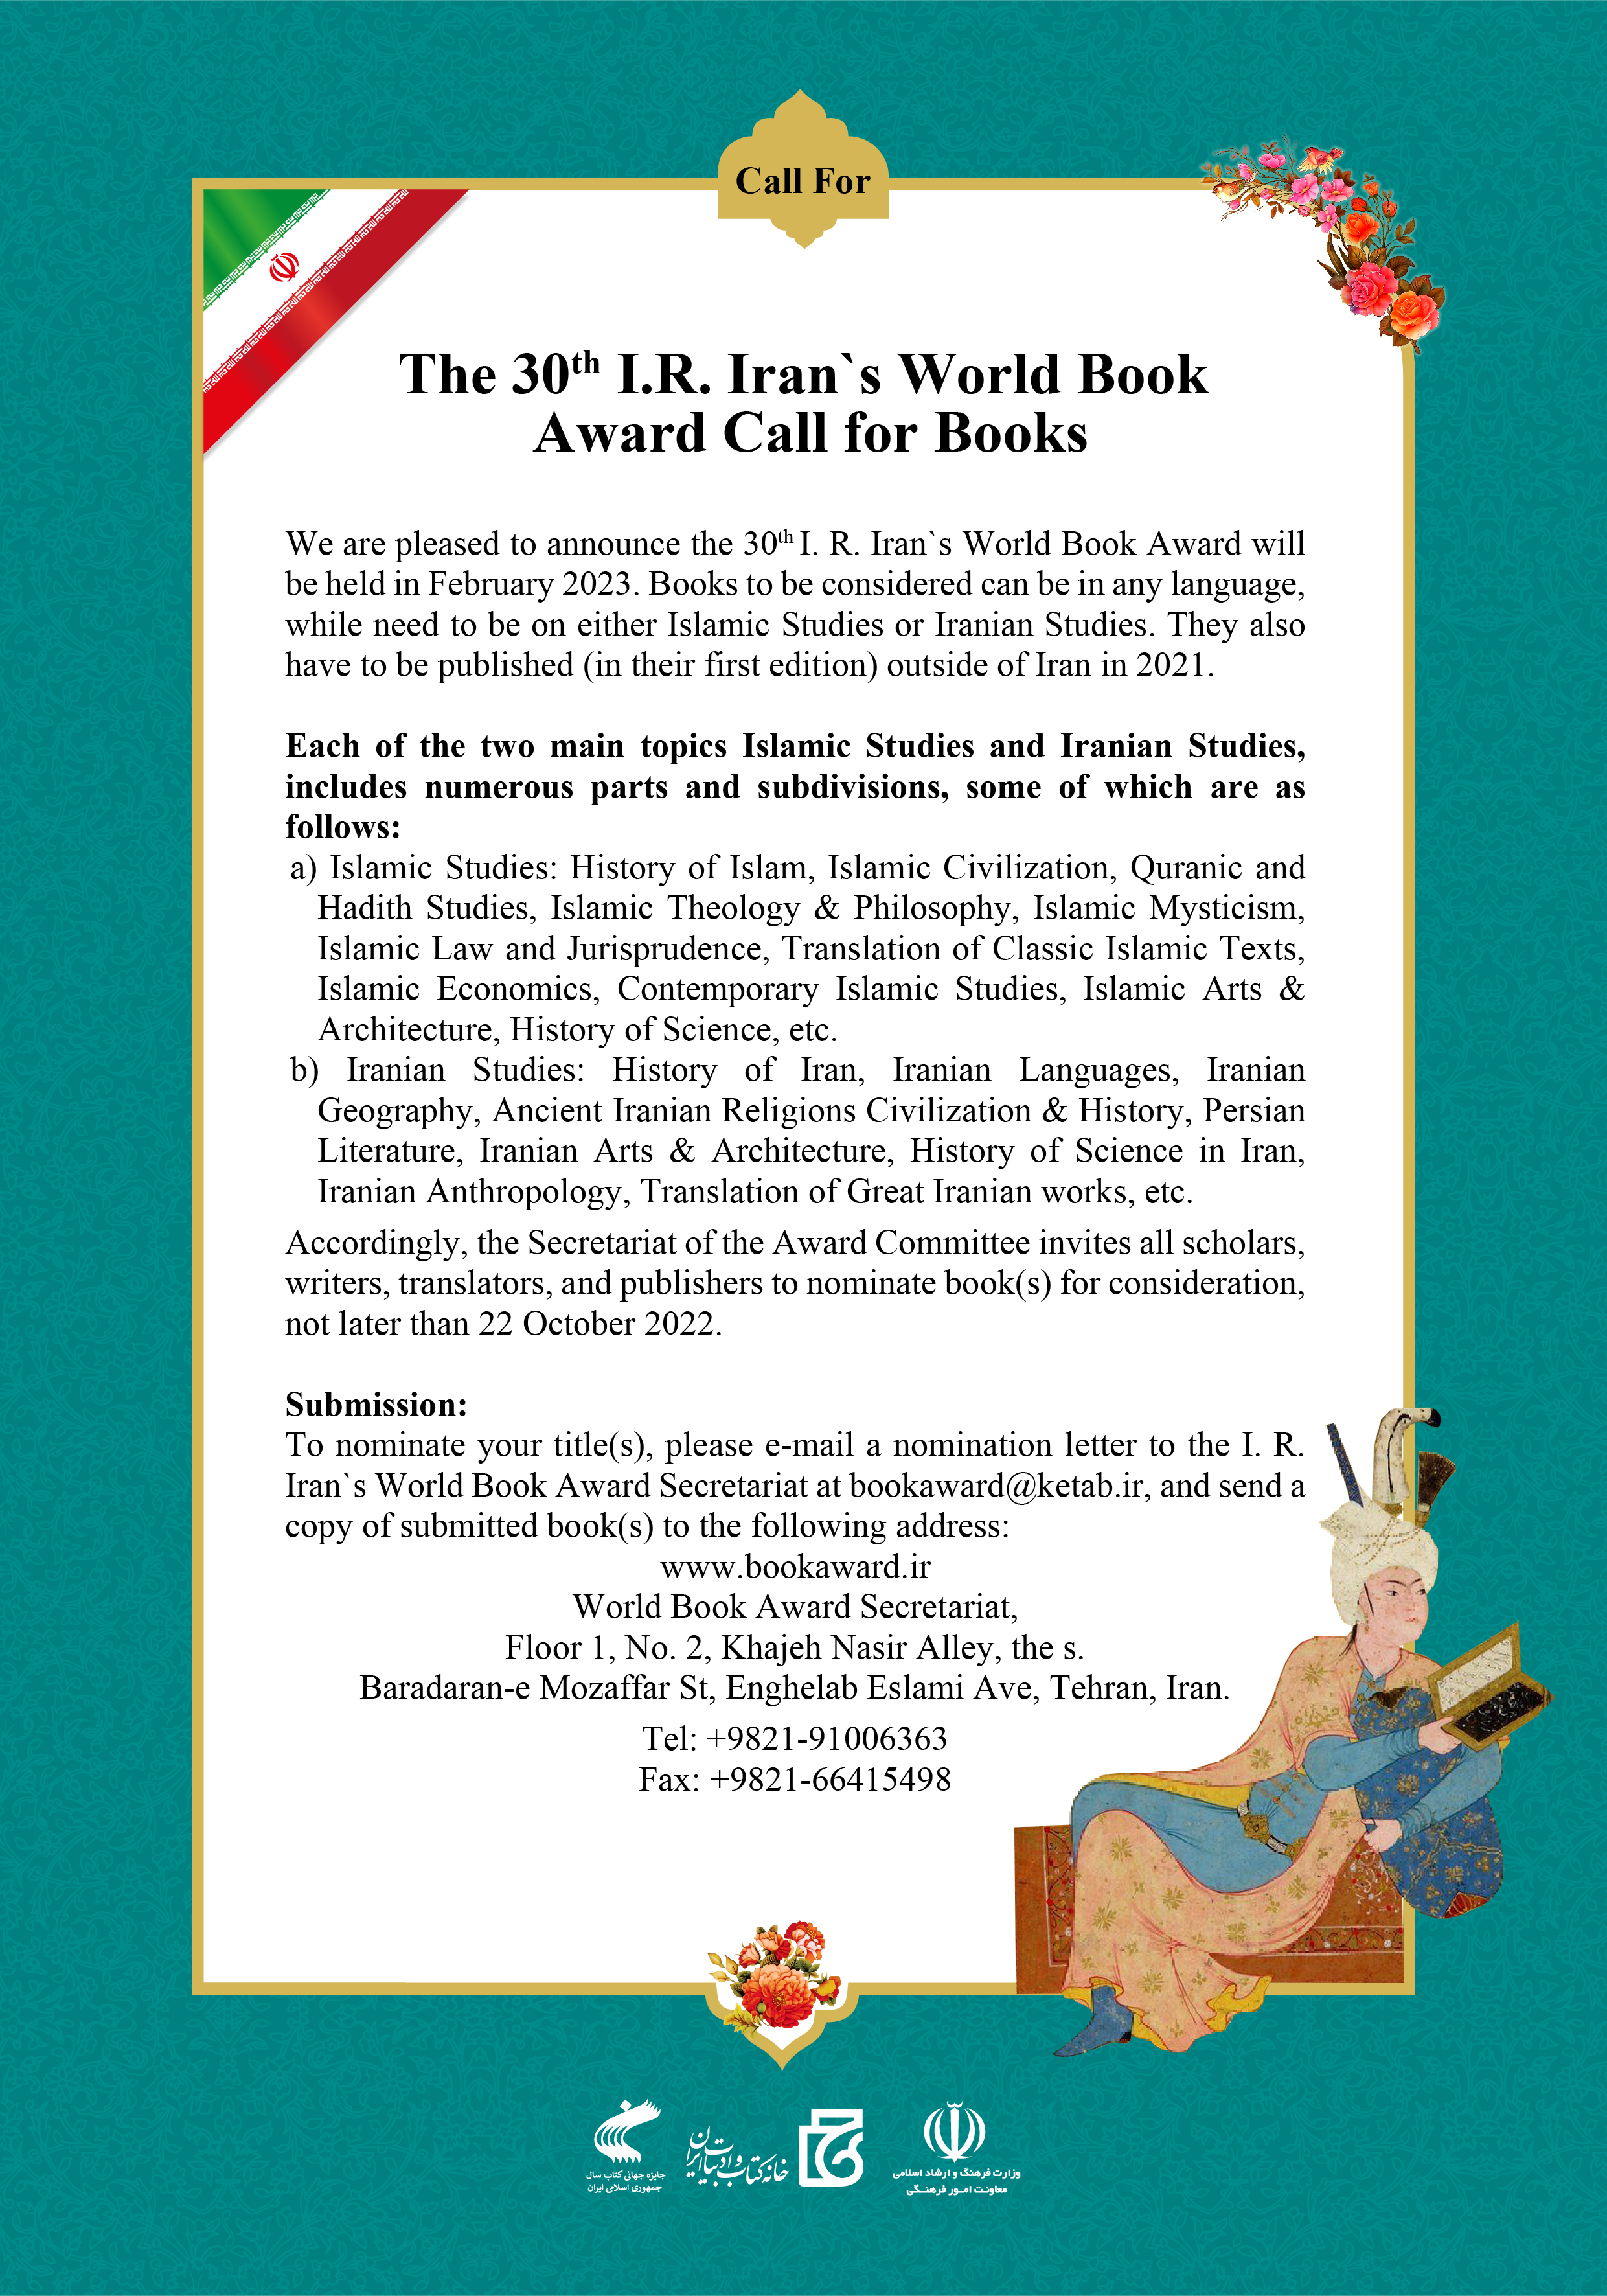 Call for The 30th I.R. Iran`s World Book Award issued